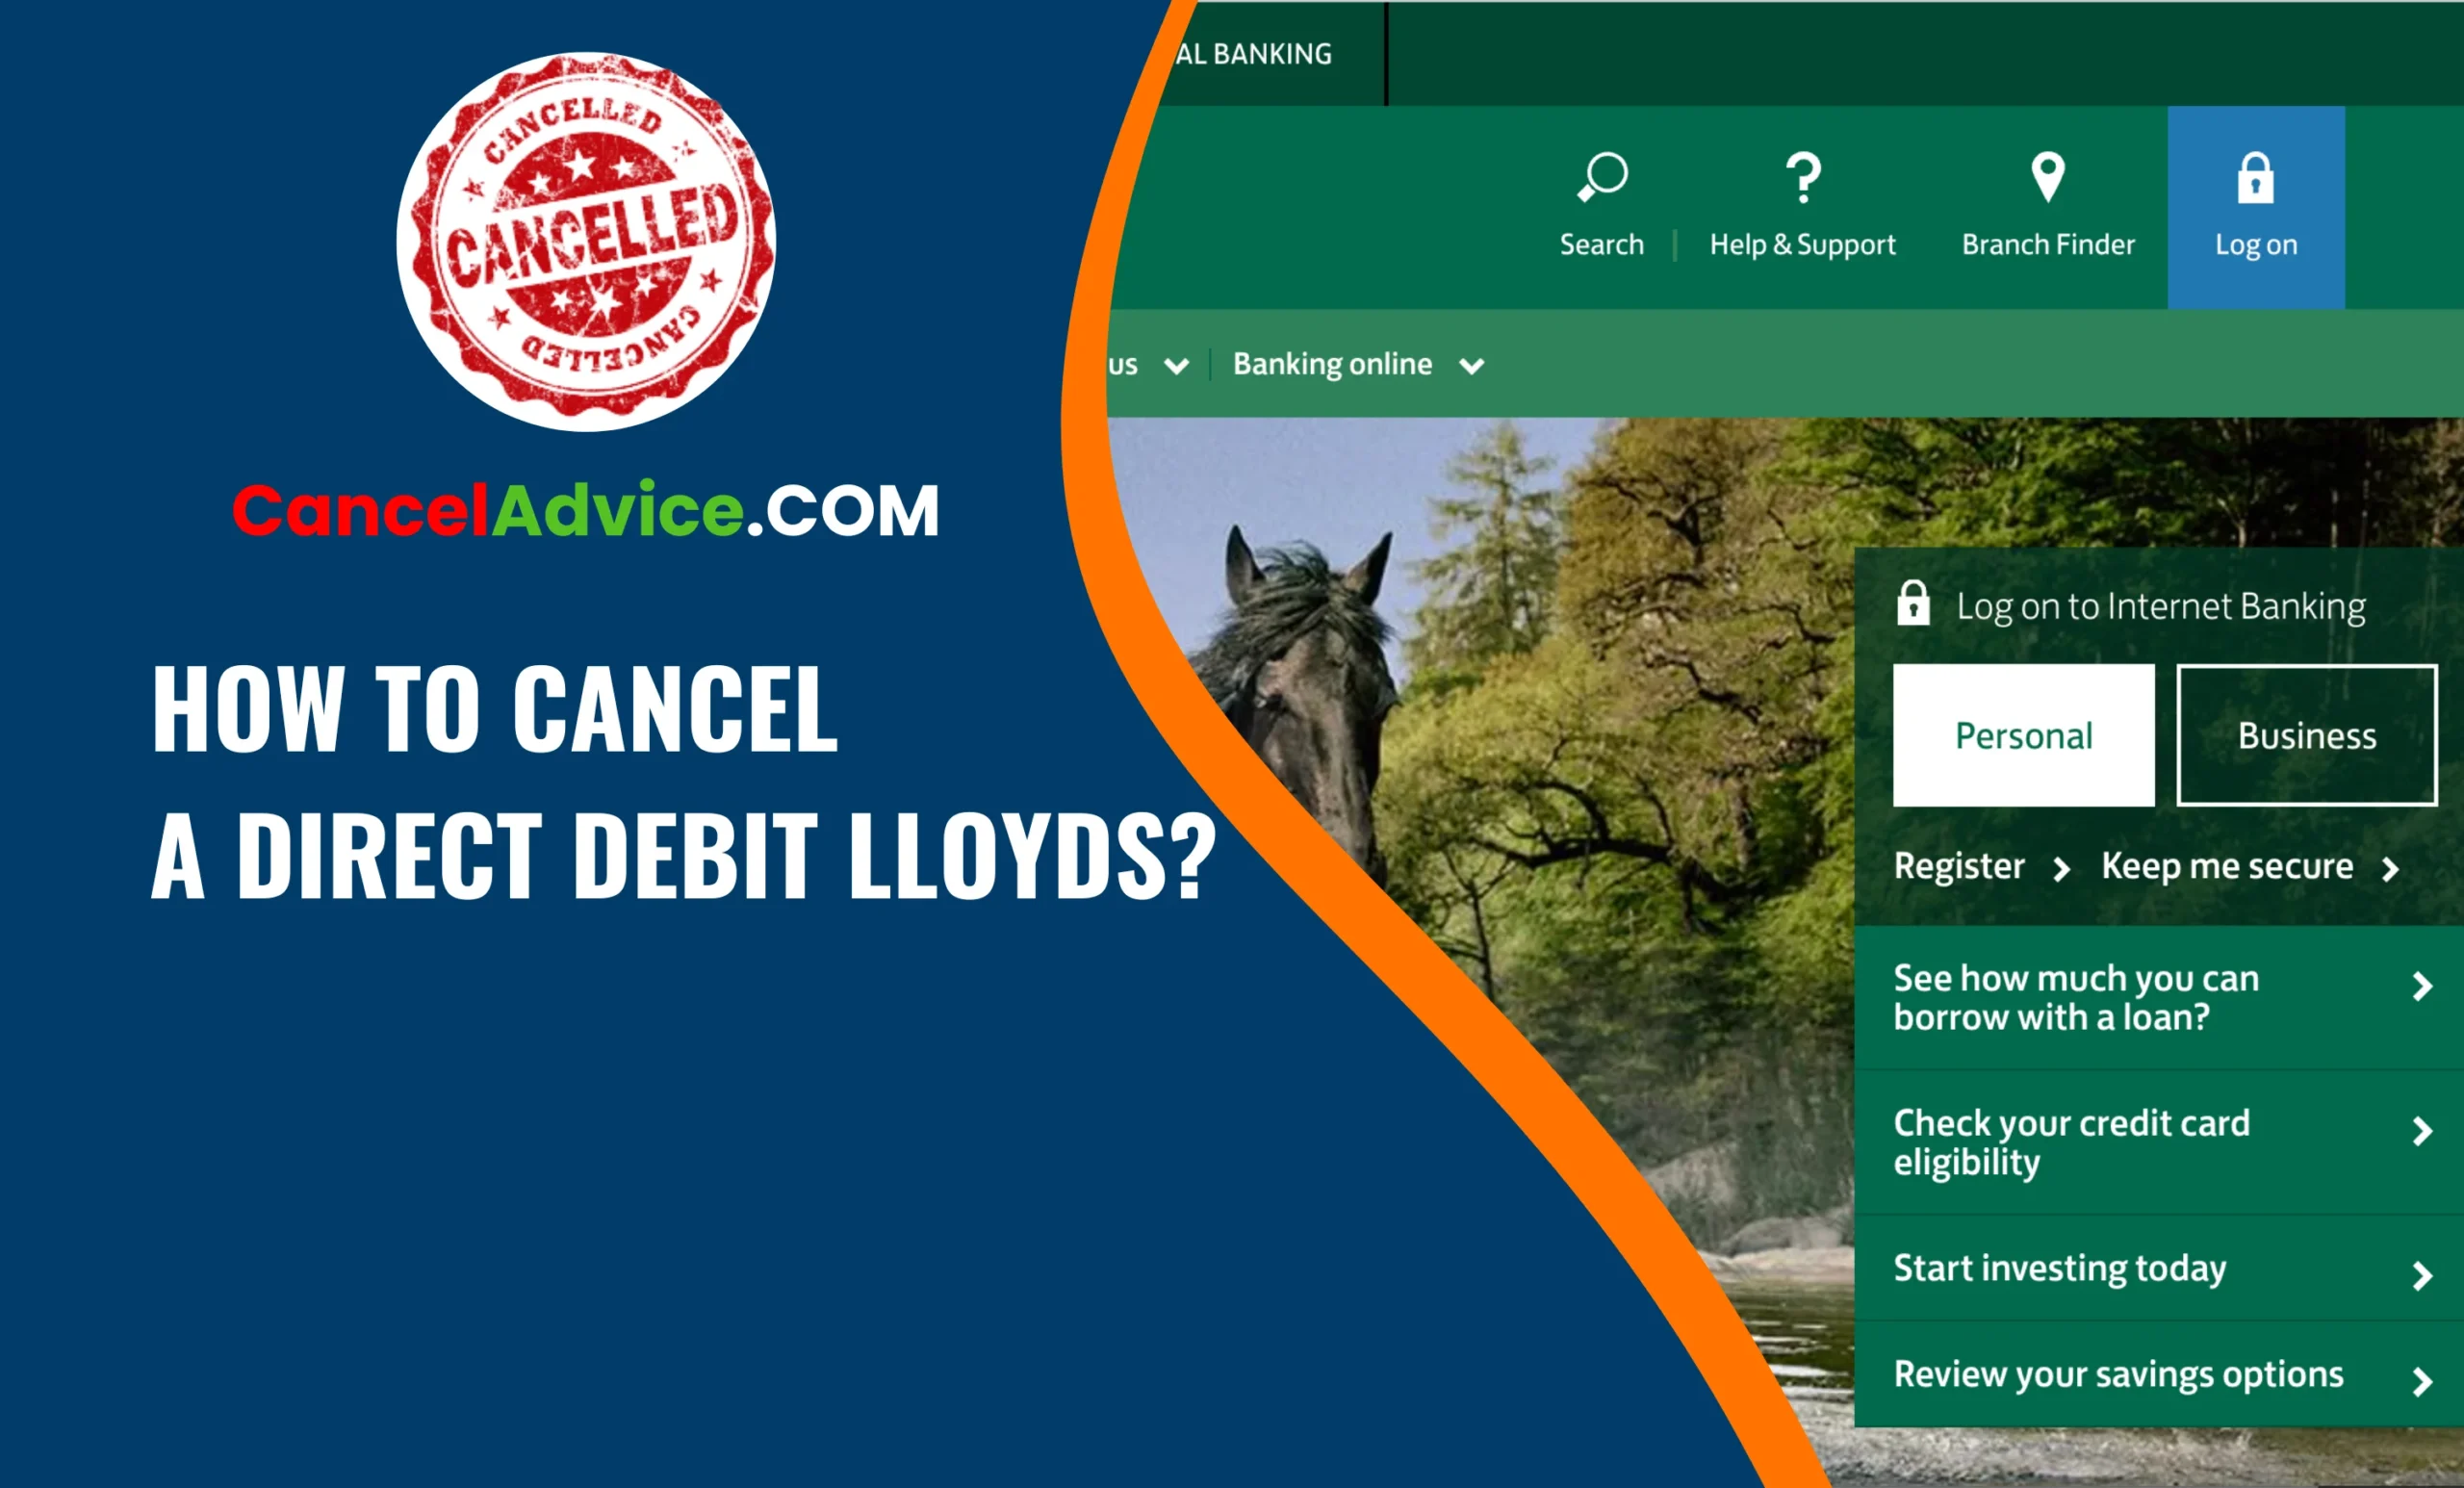 How To Cancel A Direct Debit Lloyds